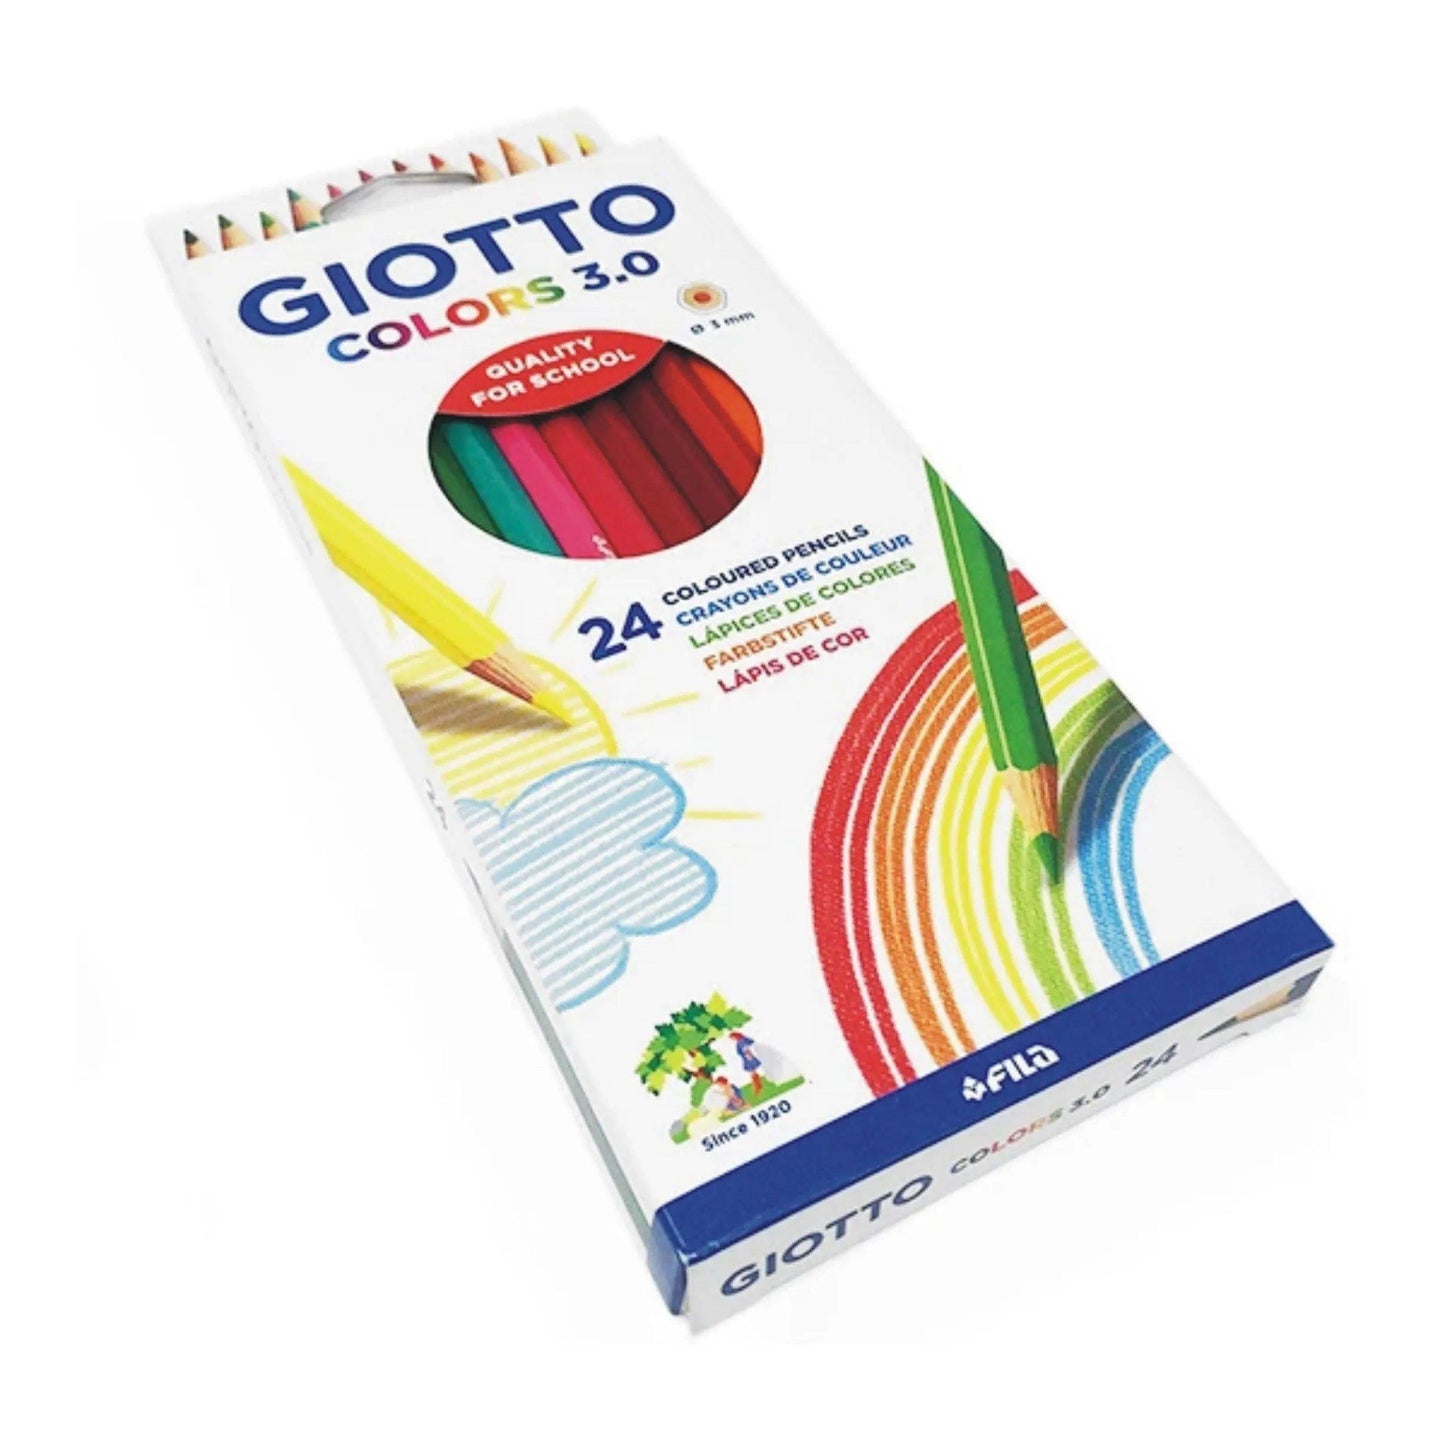 FILA Giotto Watercolor Pencils 3.0 set of 24 pcs The Stationers